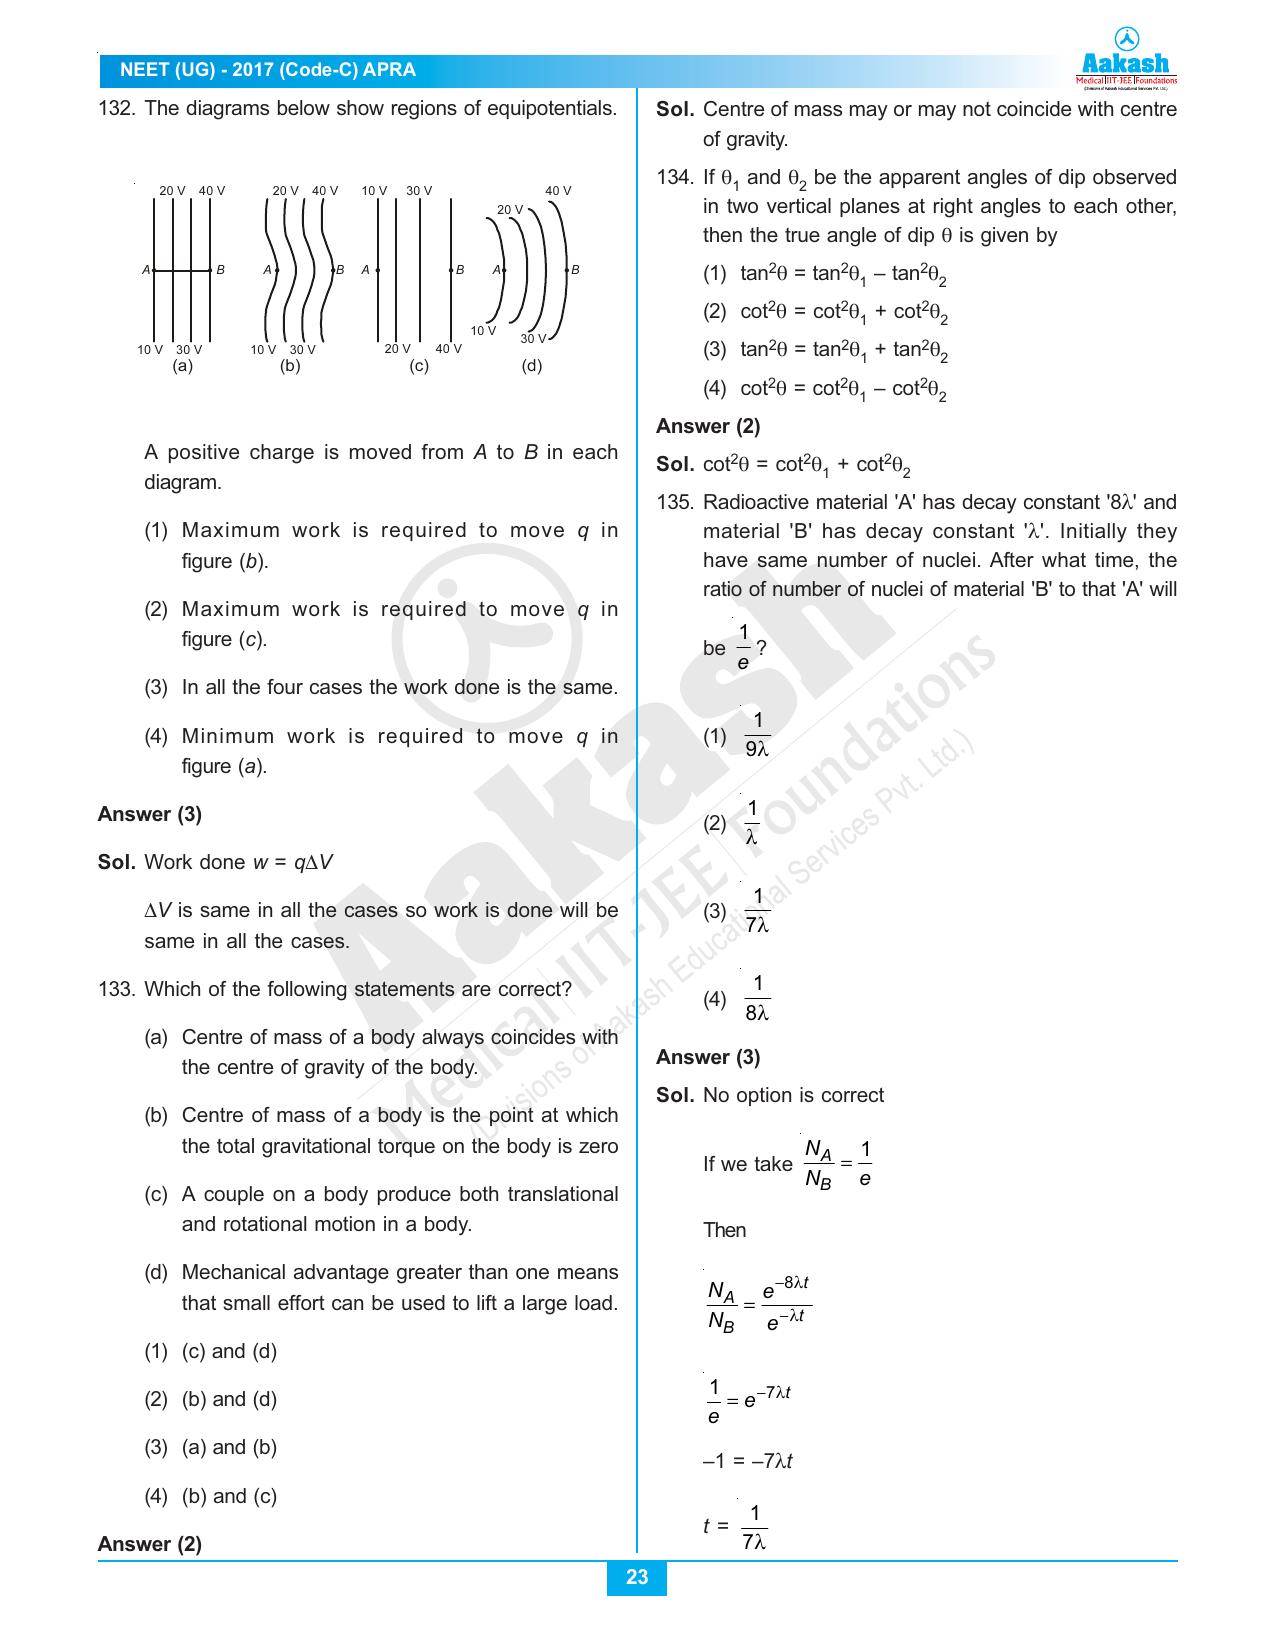  NEET Code C 2017 Answer & Solutions - Page 23